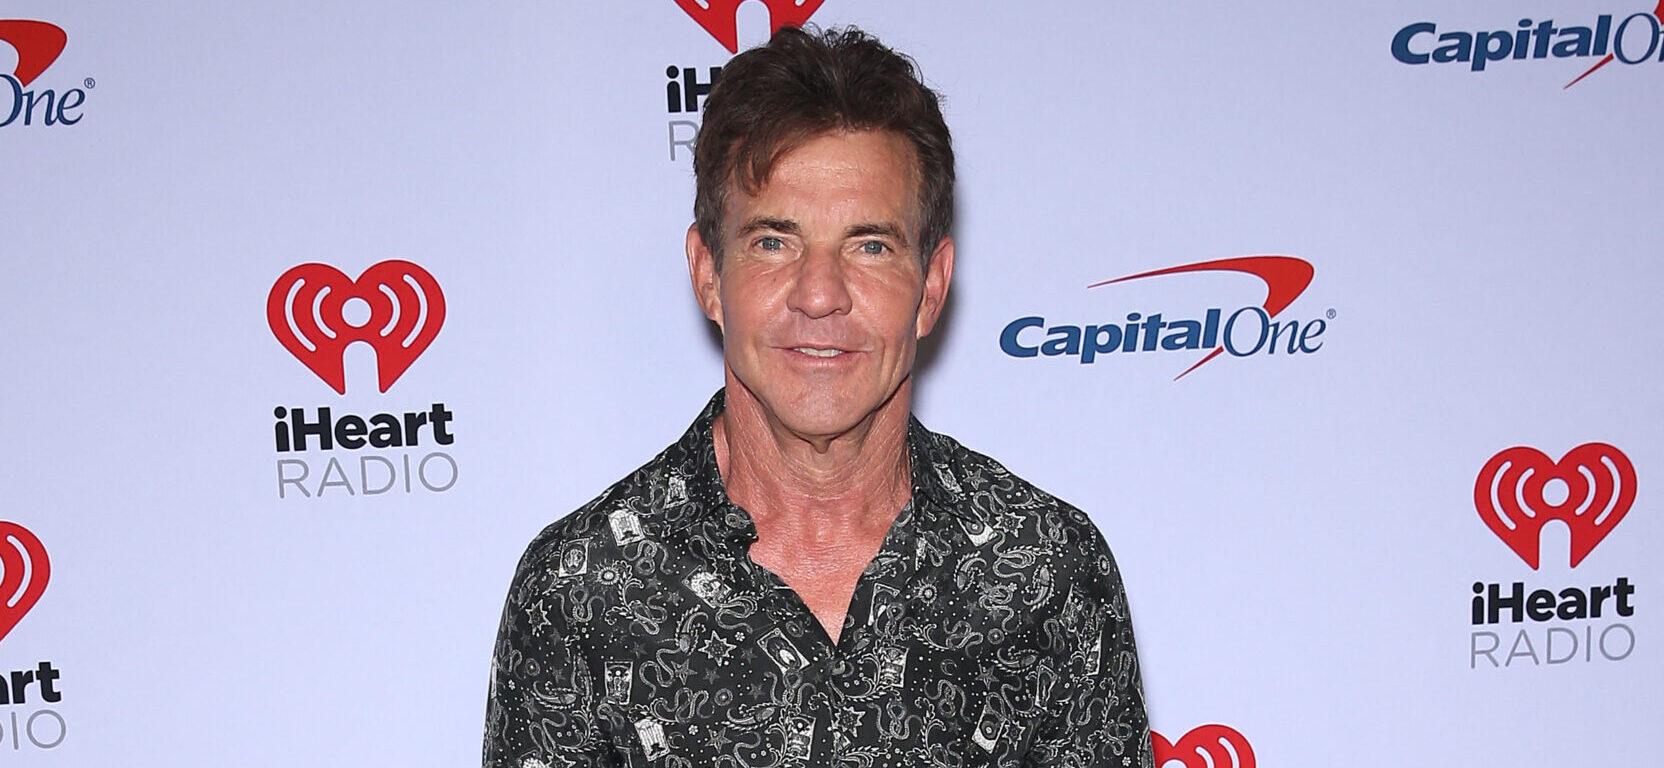 Dennis Quaid Gets Candid About Past Cocaine Addiction And ‘White Light Experience’ That Led Him To Rehab